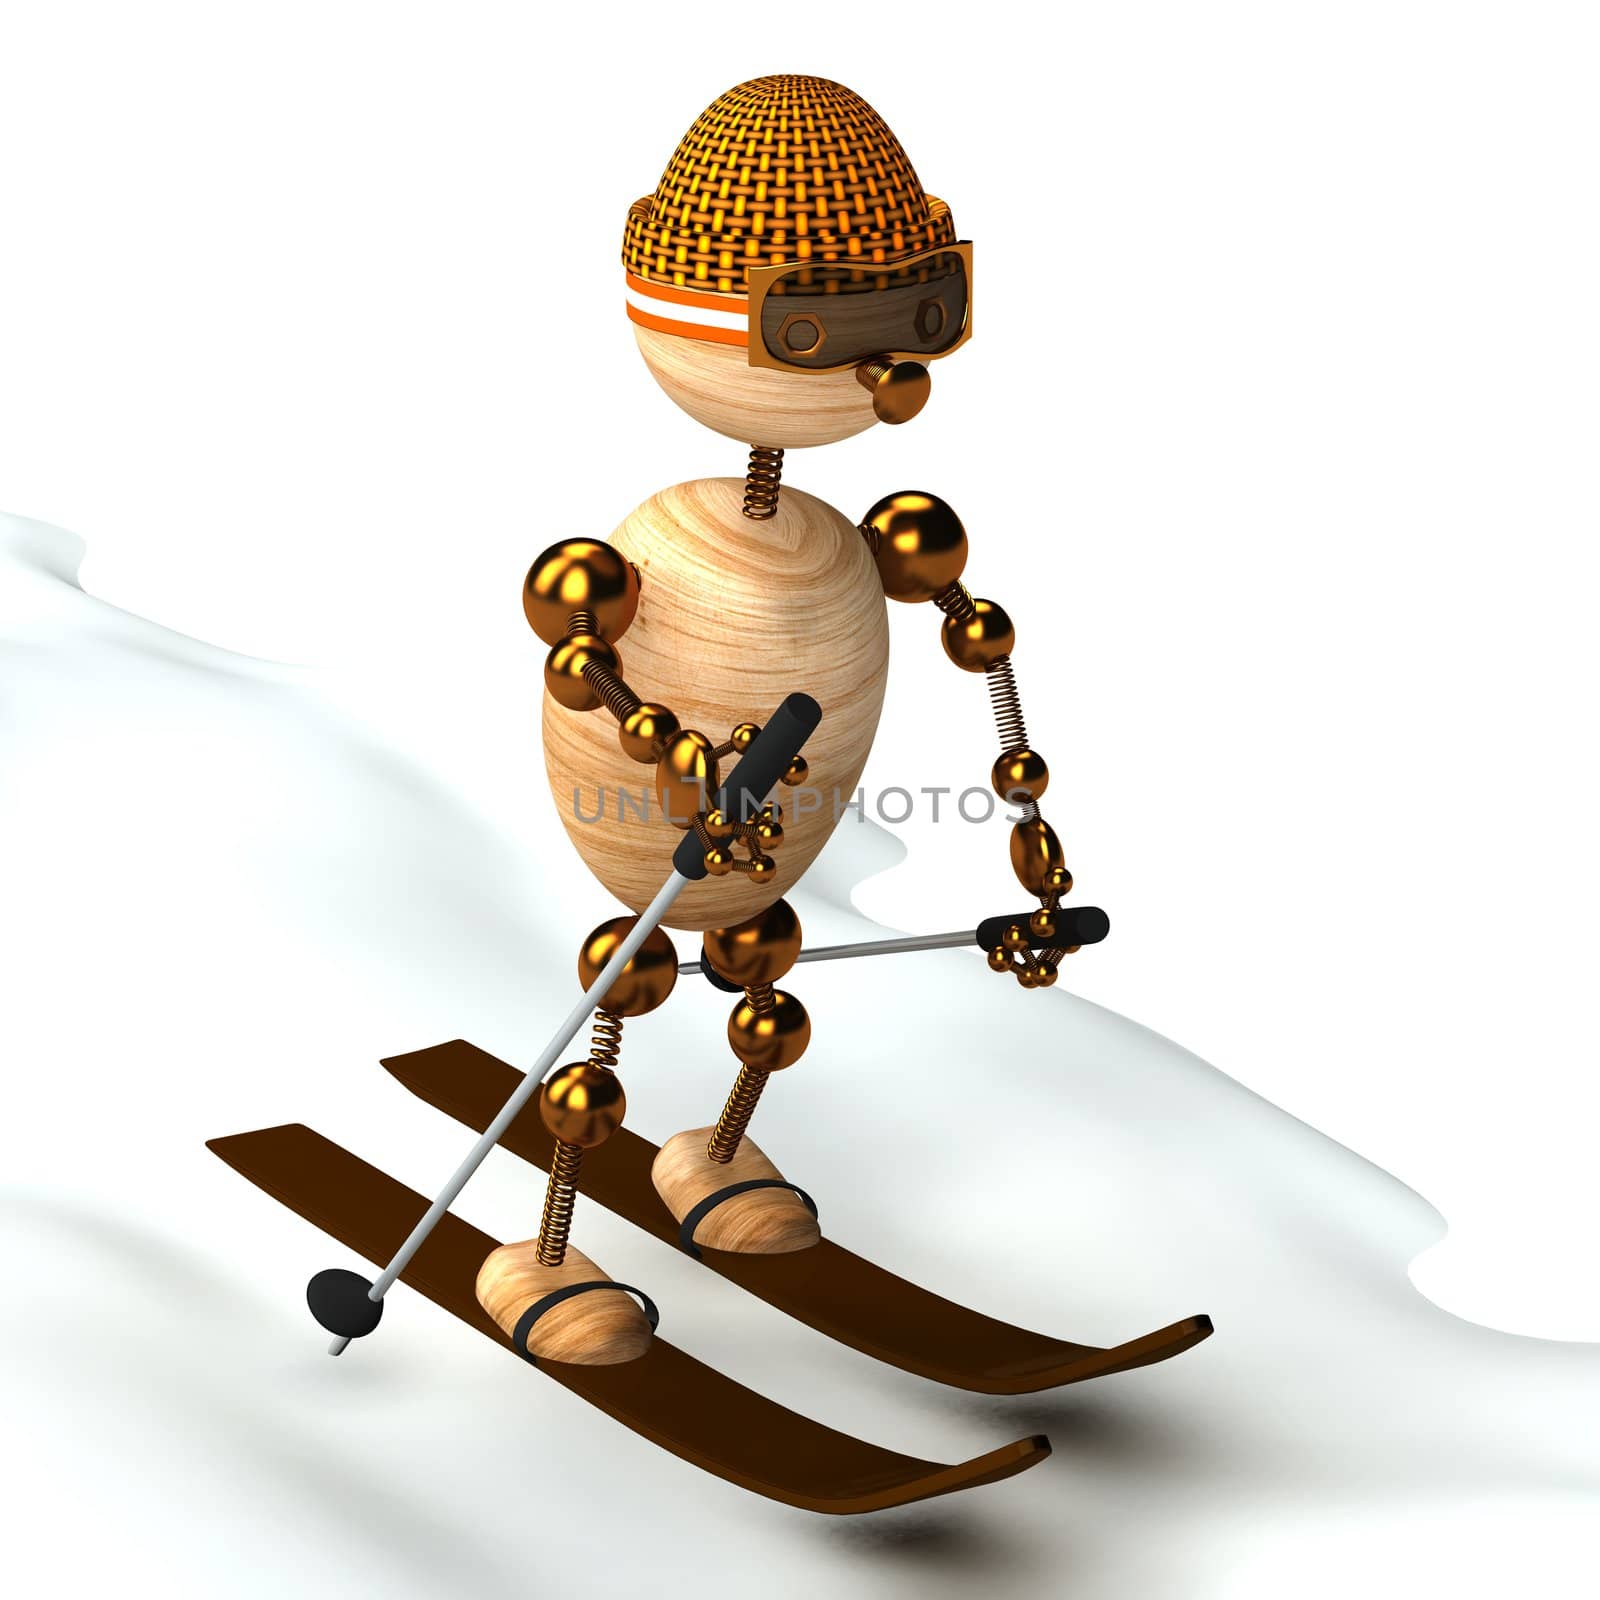 wood man skiing down a slope for web